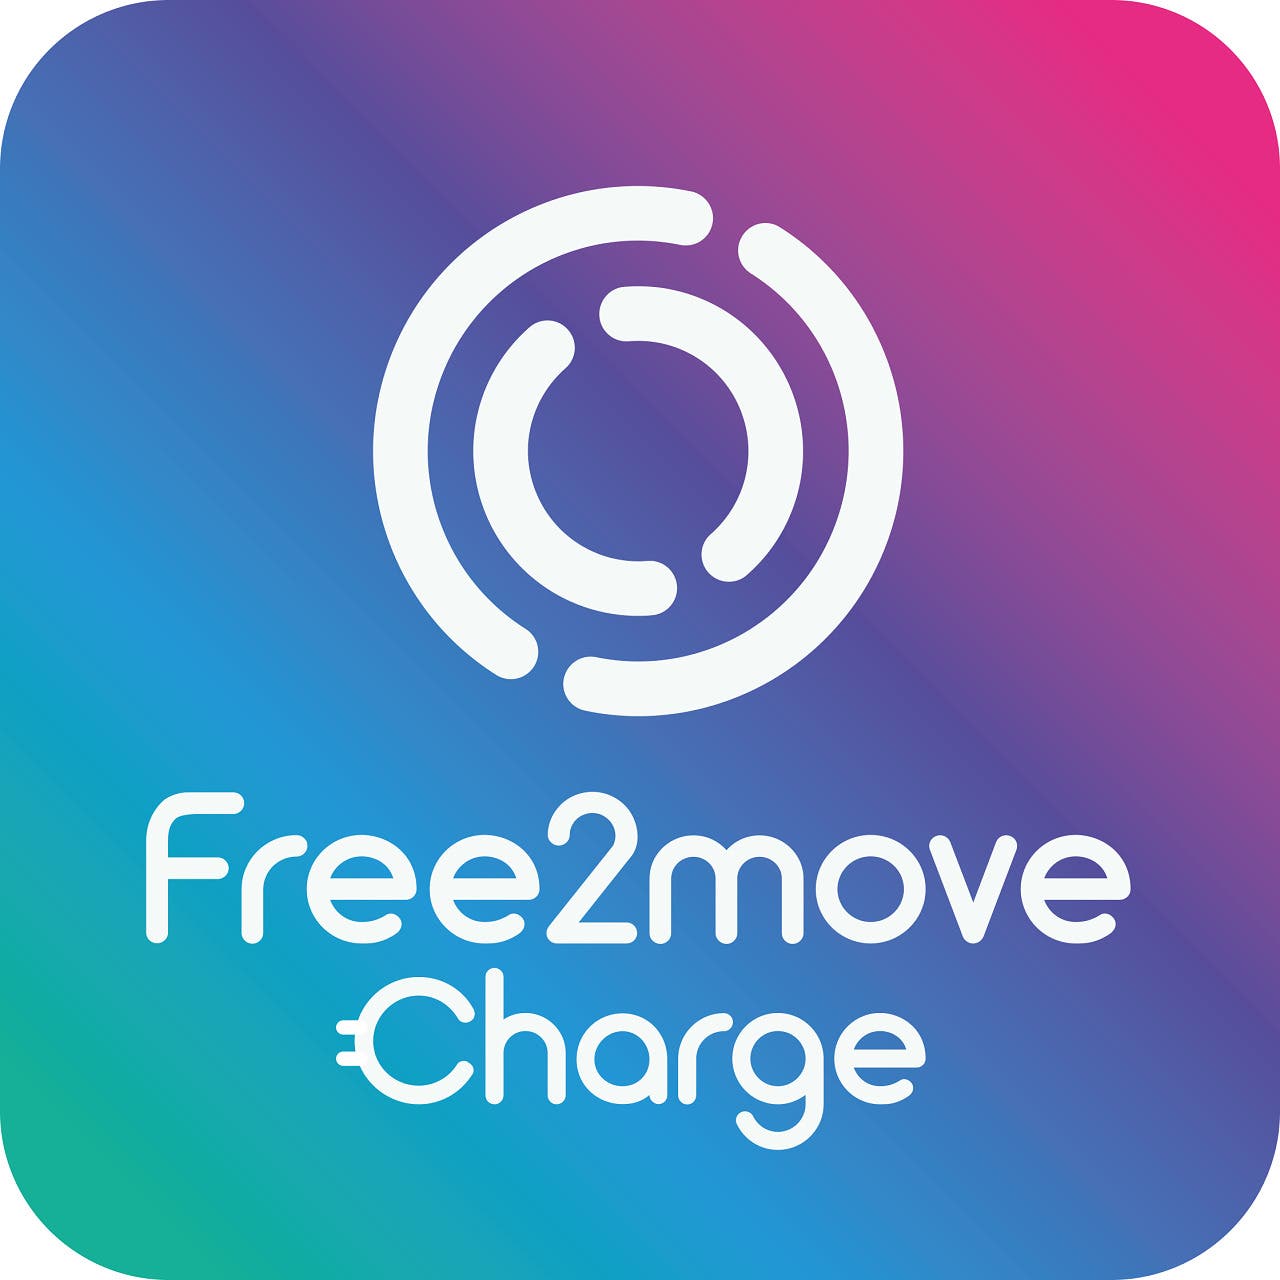 Free2Move Charge